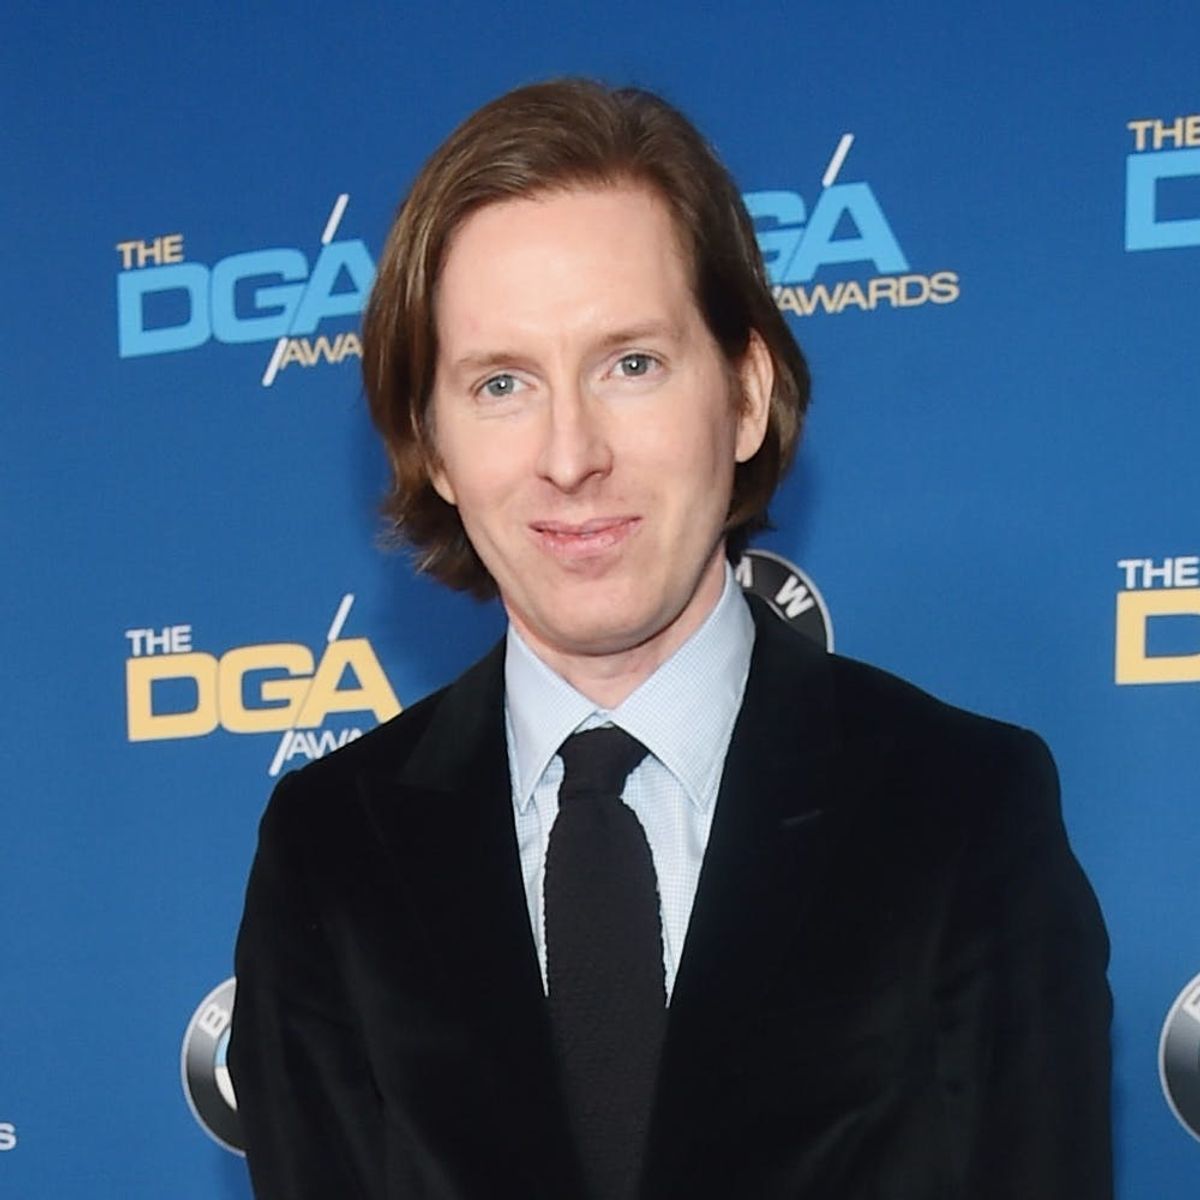 You Could Be in Wes Anderson’s New Isle of Dogs Movie Along With a Slew of Stars